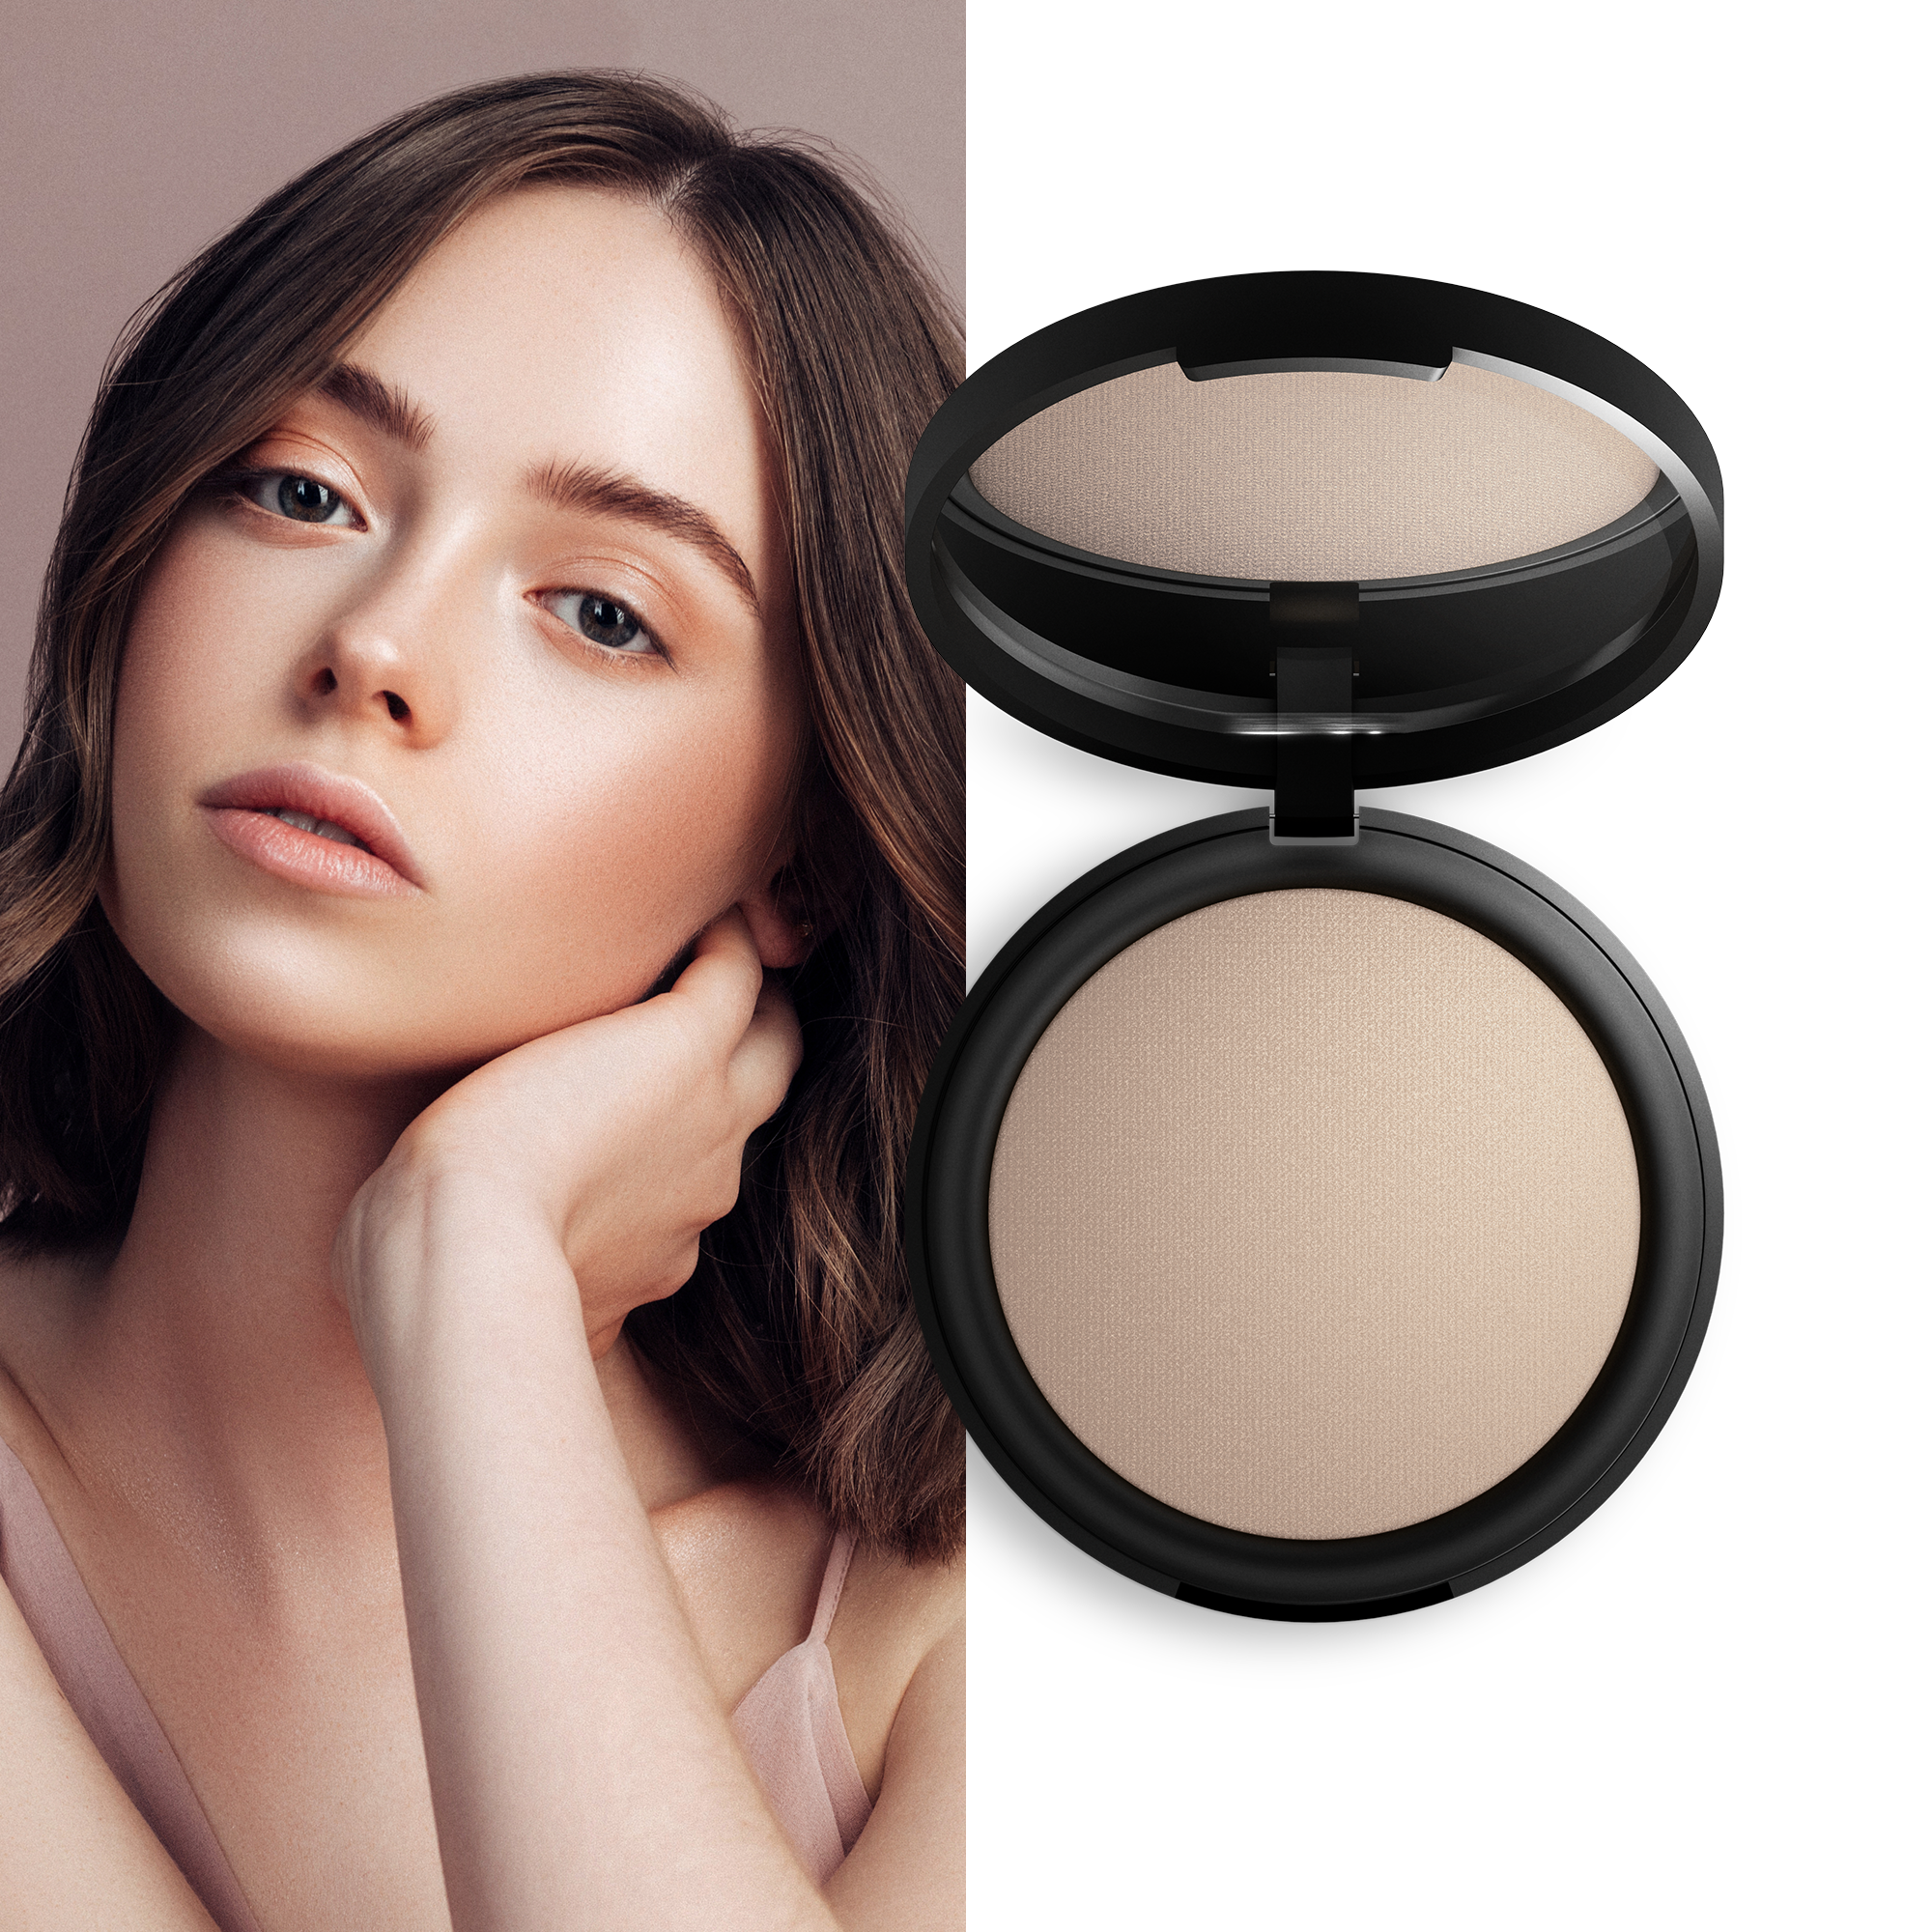 BAKED MINERAL FOUNDATION